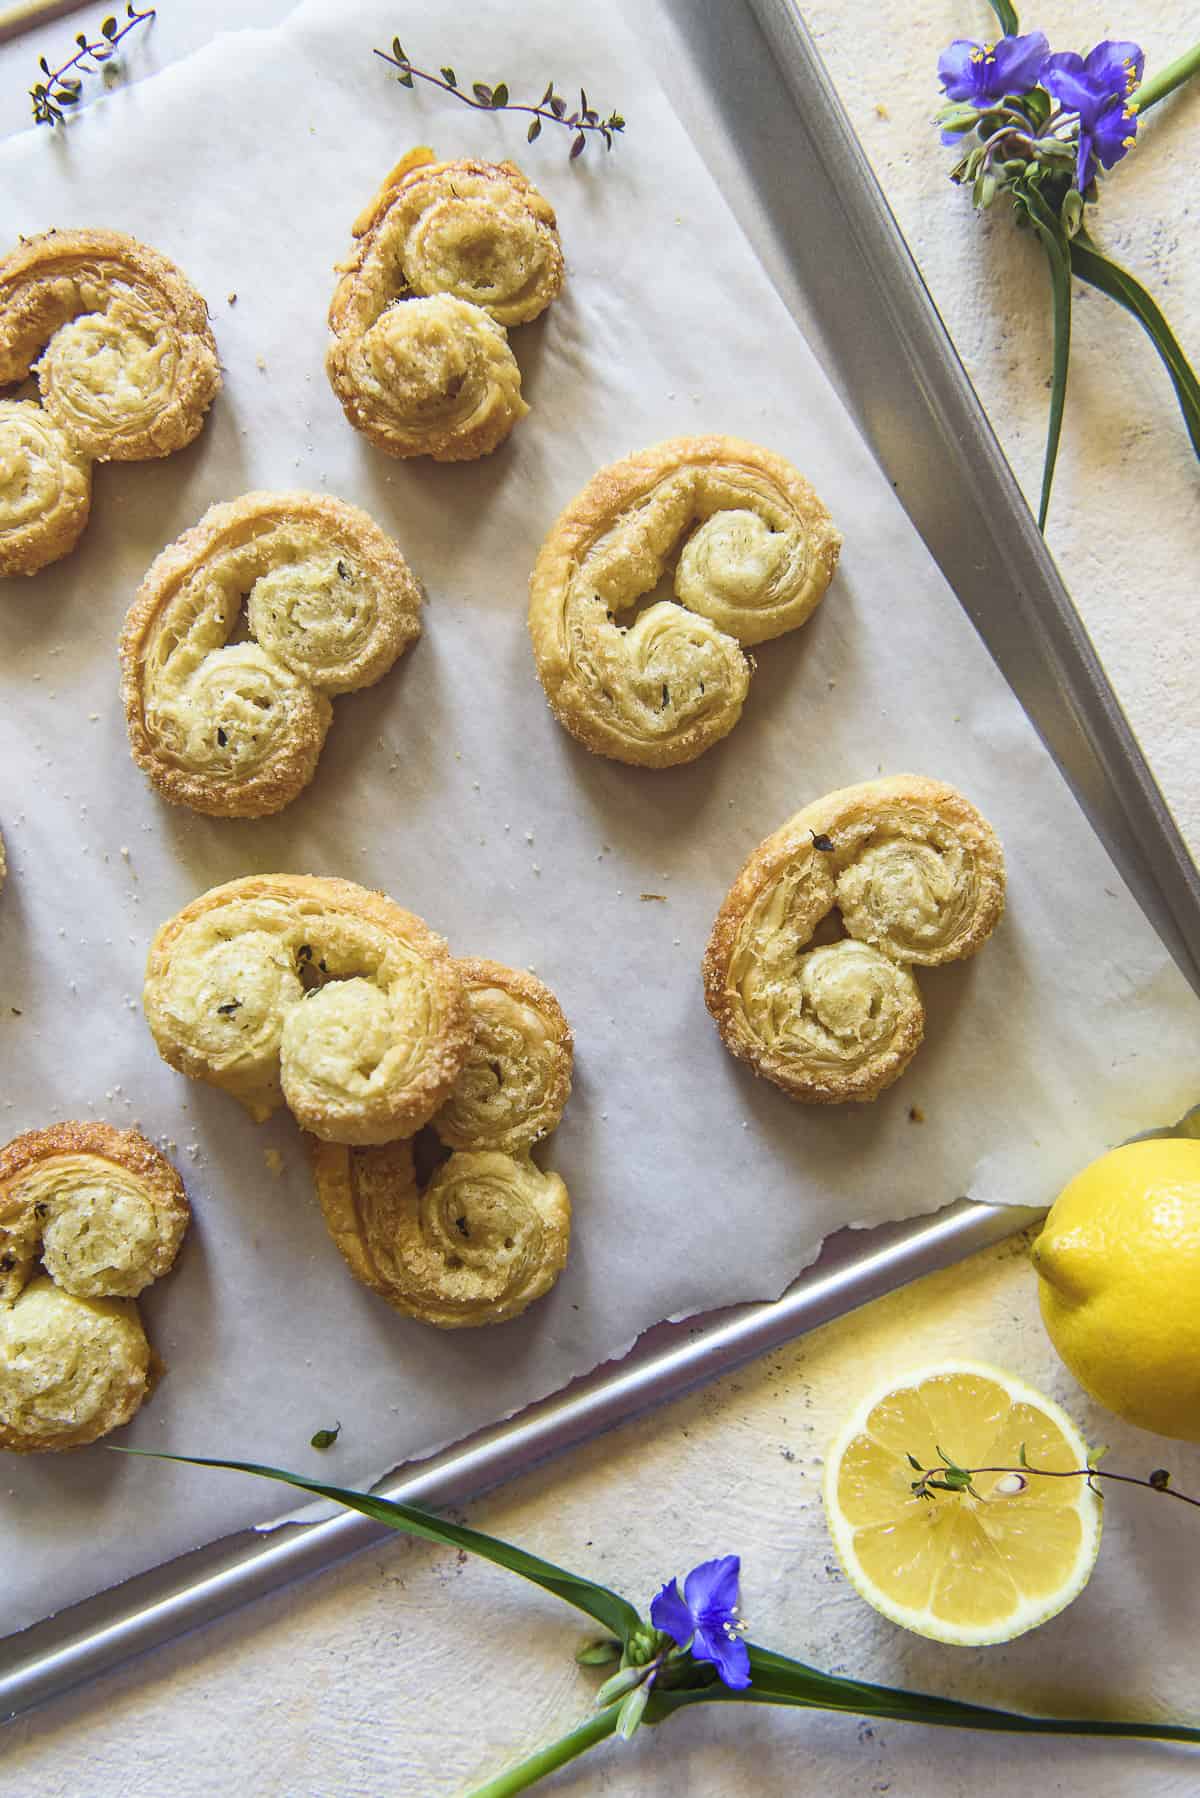 Freshly baked lemon palmiers pastry, arranged on a baking sheet with parchment paper, decorated with lemon slices and purple flowers.